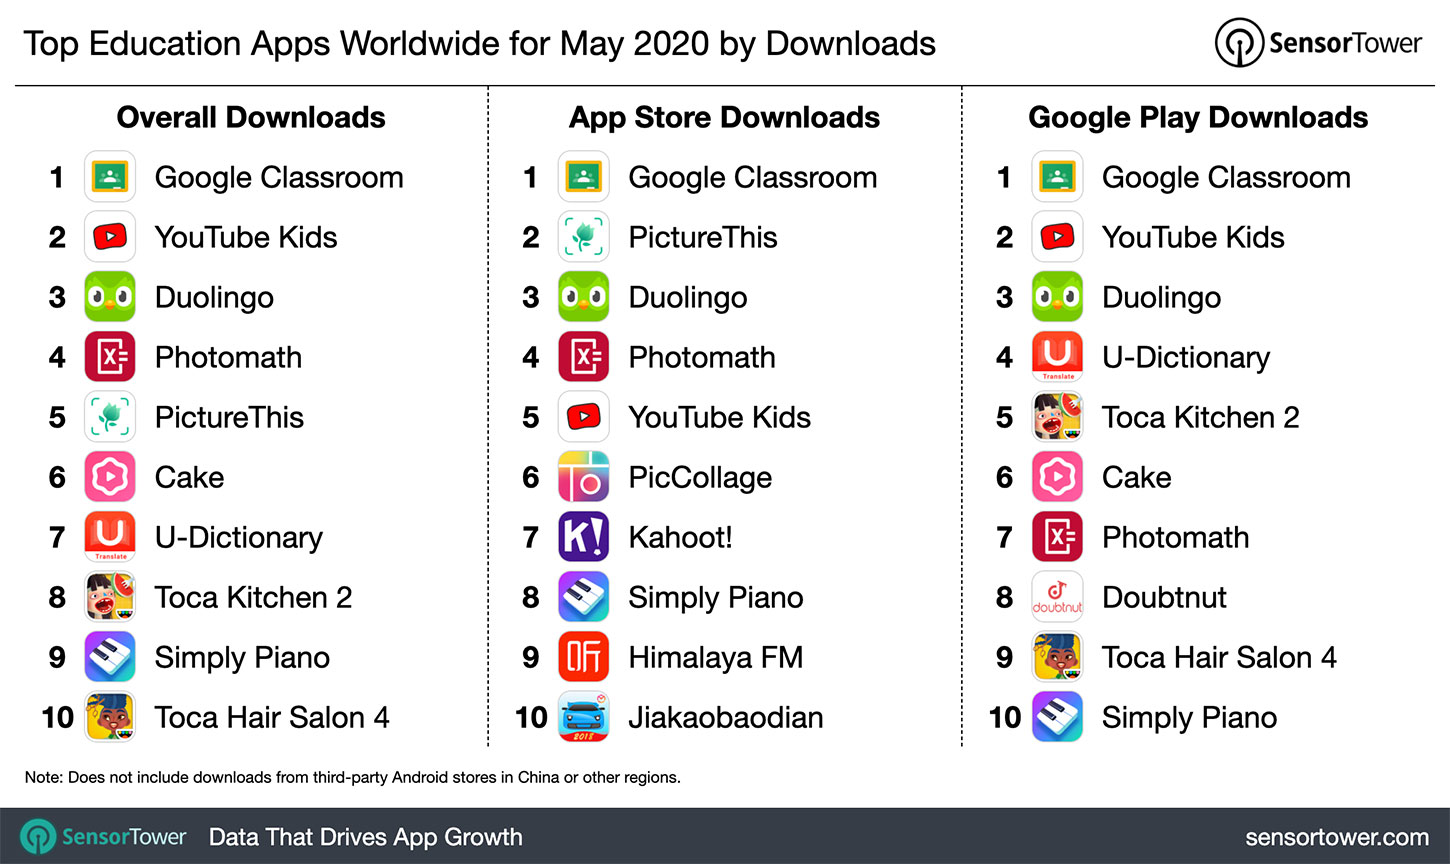 Top Education category Apps Worldwide for May 2020 by Downloads